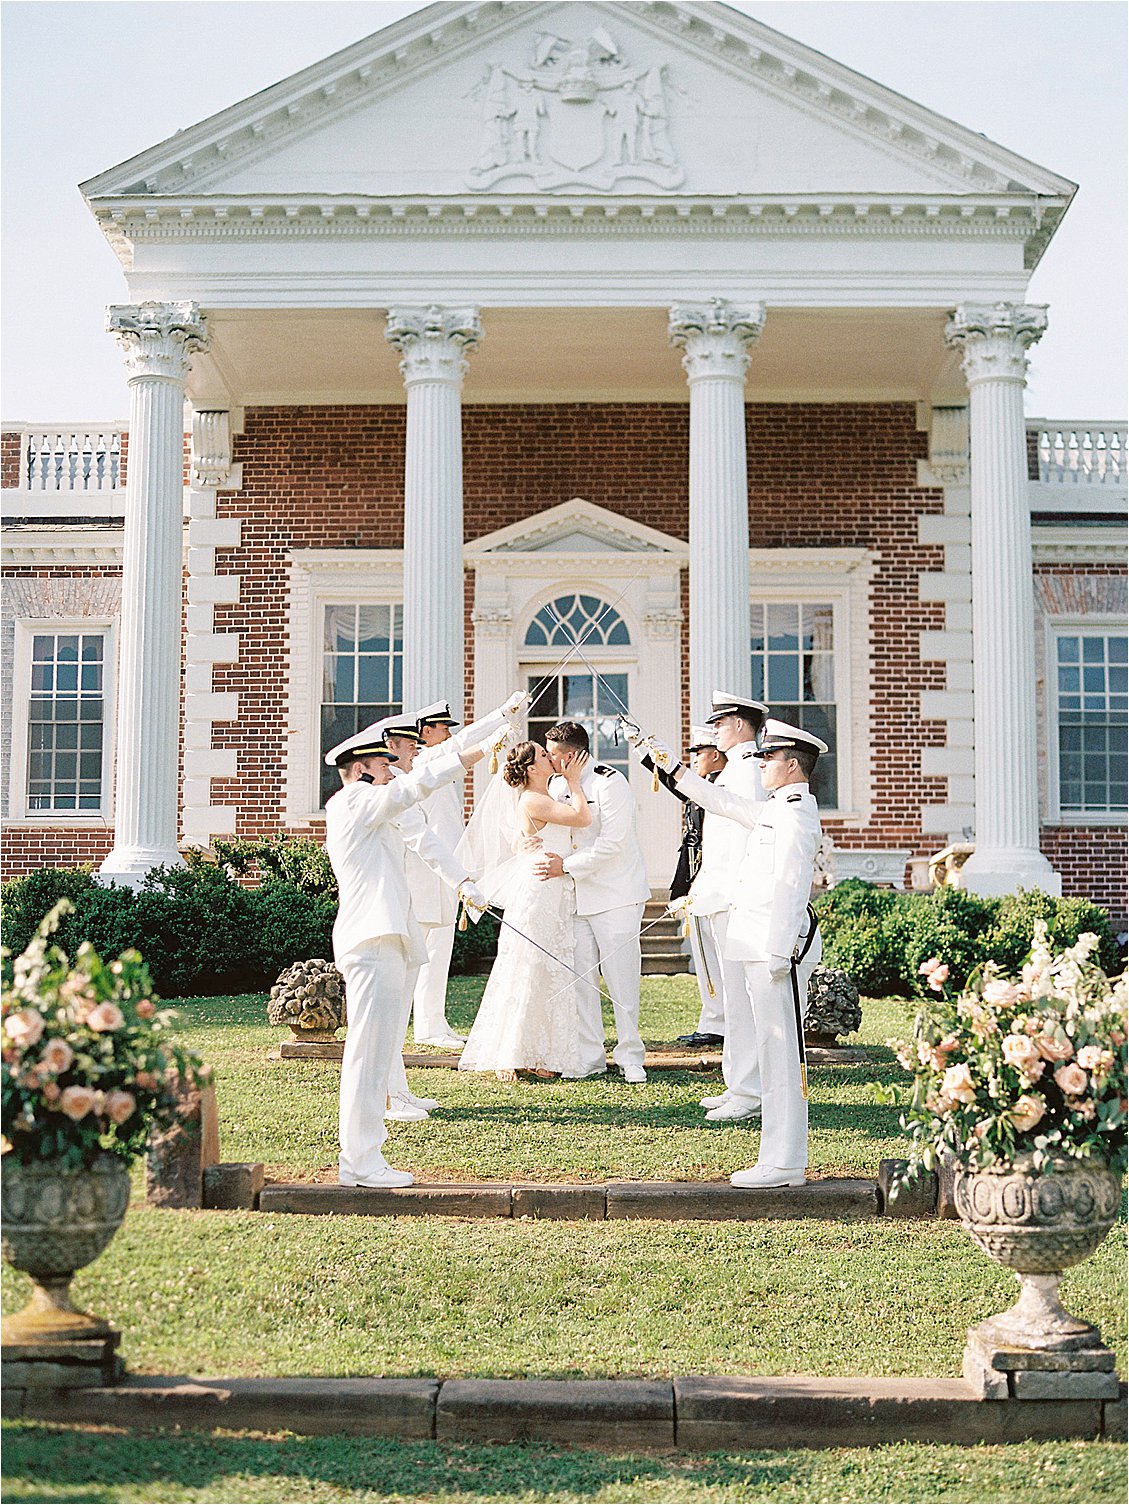 Classic Navy Sword Arch at Summer Wedding at Whitehall in Annapolis with Annapolis + Destination Film Wedding Photographer, Renee Hollingshead with Adriana Marie Events, Crimson & Clover Floral Design, White Glove Rentals, and more